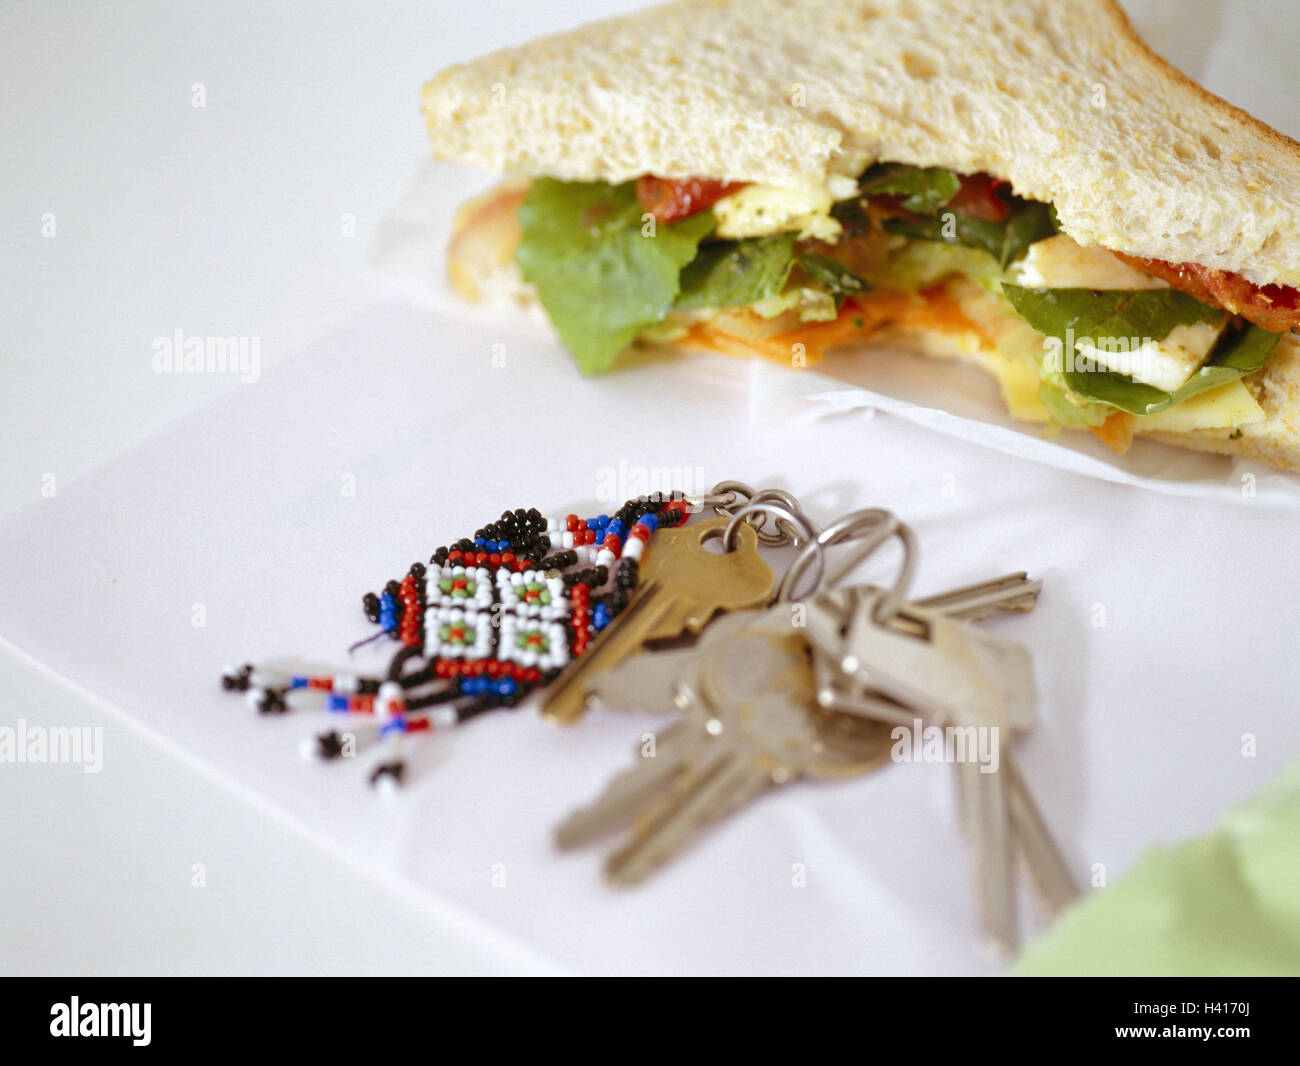 Table, sandwich, bitten into, key bundle, white bread, toast bread, bread, books, intermeal, hunger, appetite, eat, occasionally, break, nutrition, key, many, key fob, Still life, product photography Stock Photo